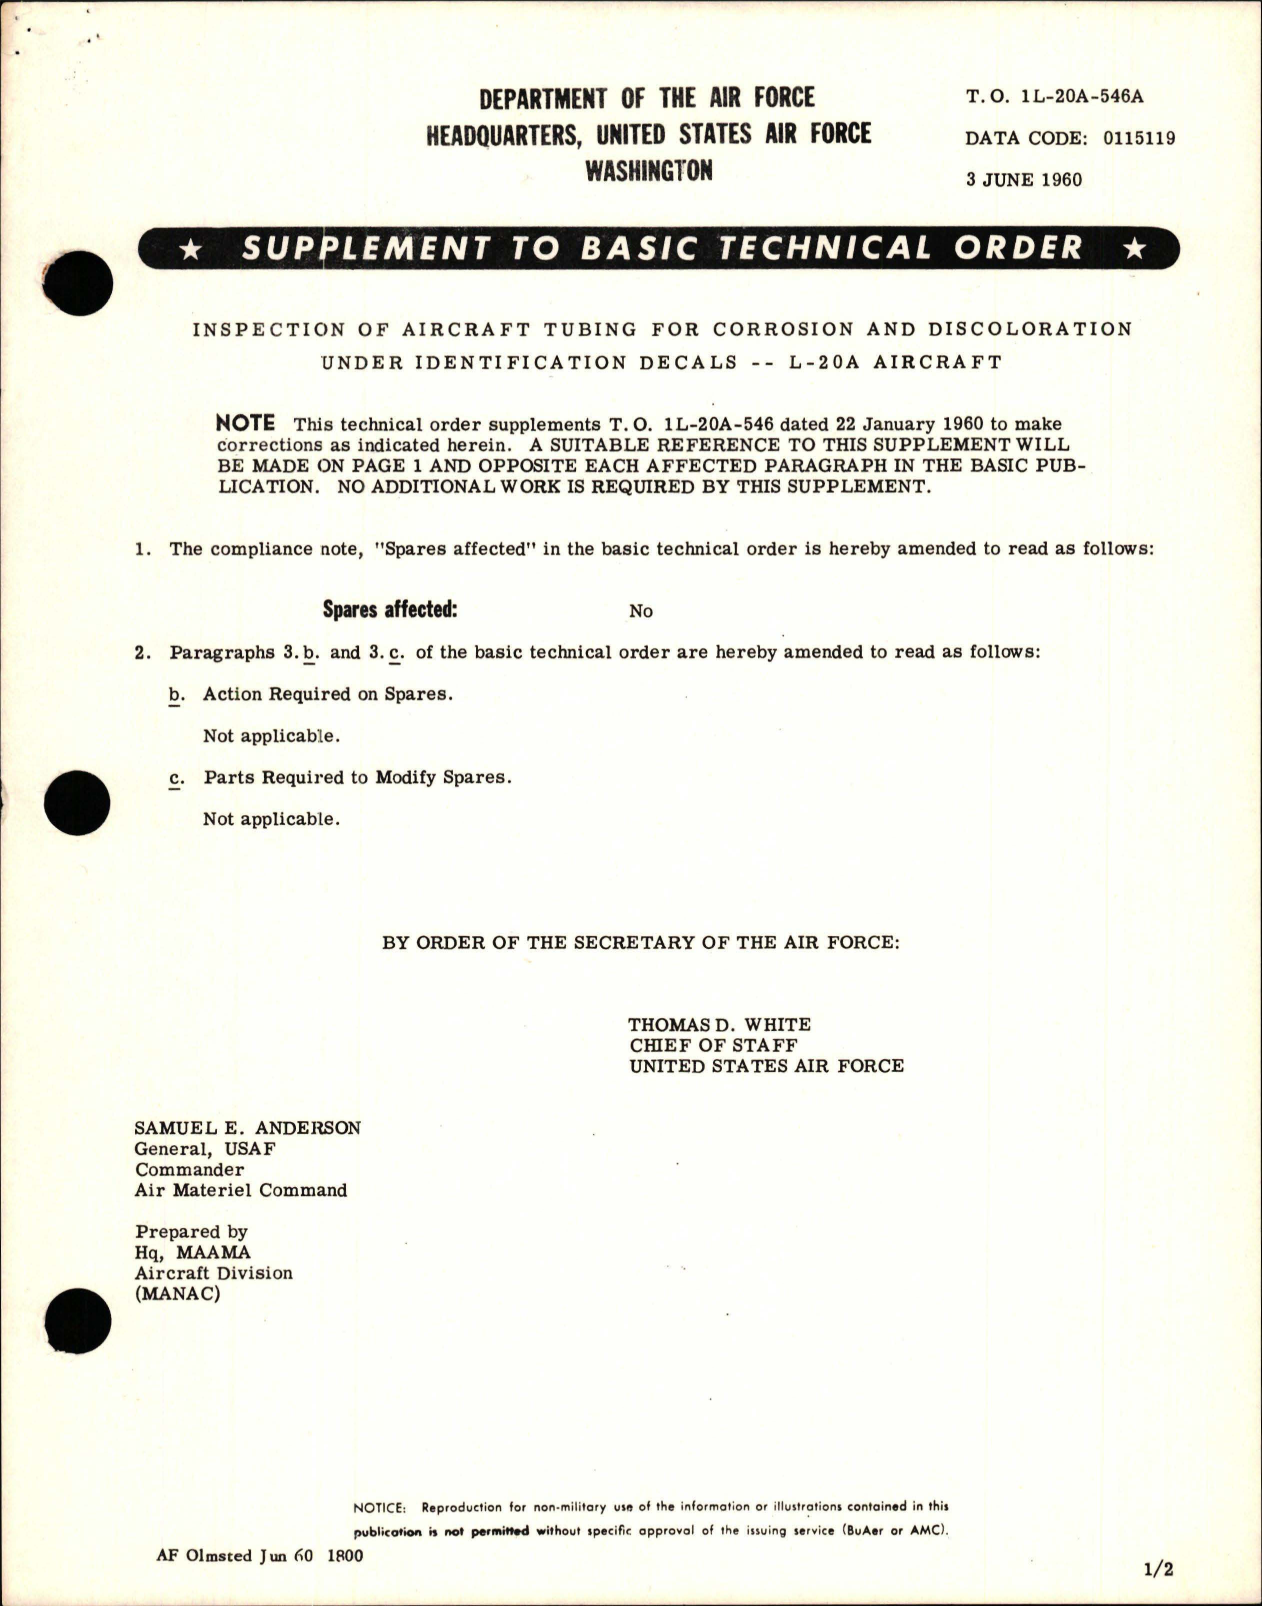 Sample page 1 from AirCorps Library document: Supplement to Inspection of Tubing for Corrosion and Discoloration Under Identification Decals - L-20A